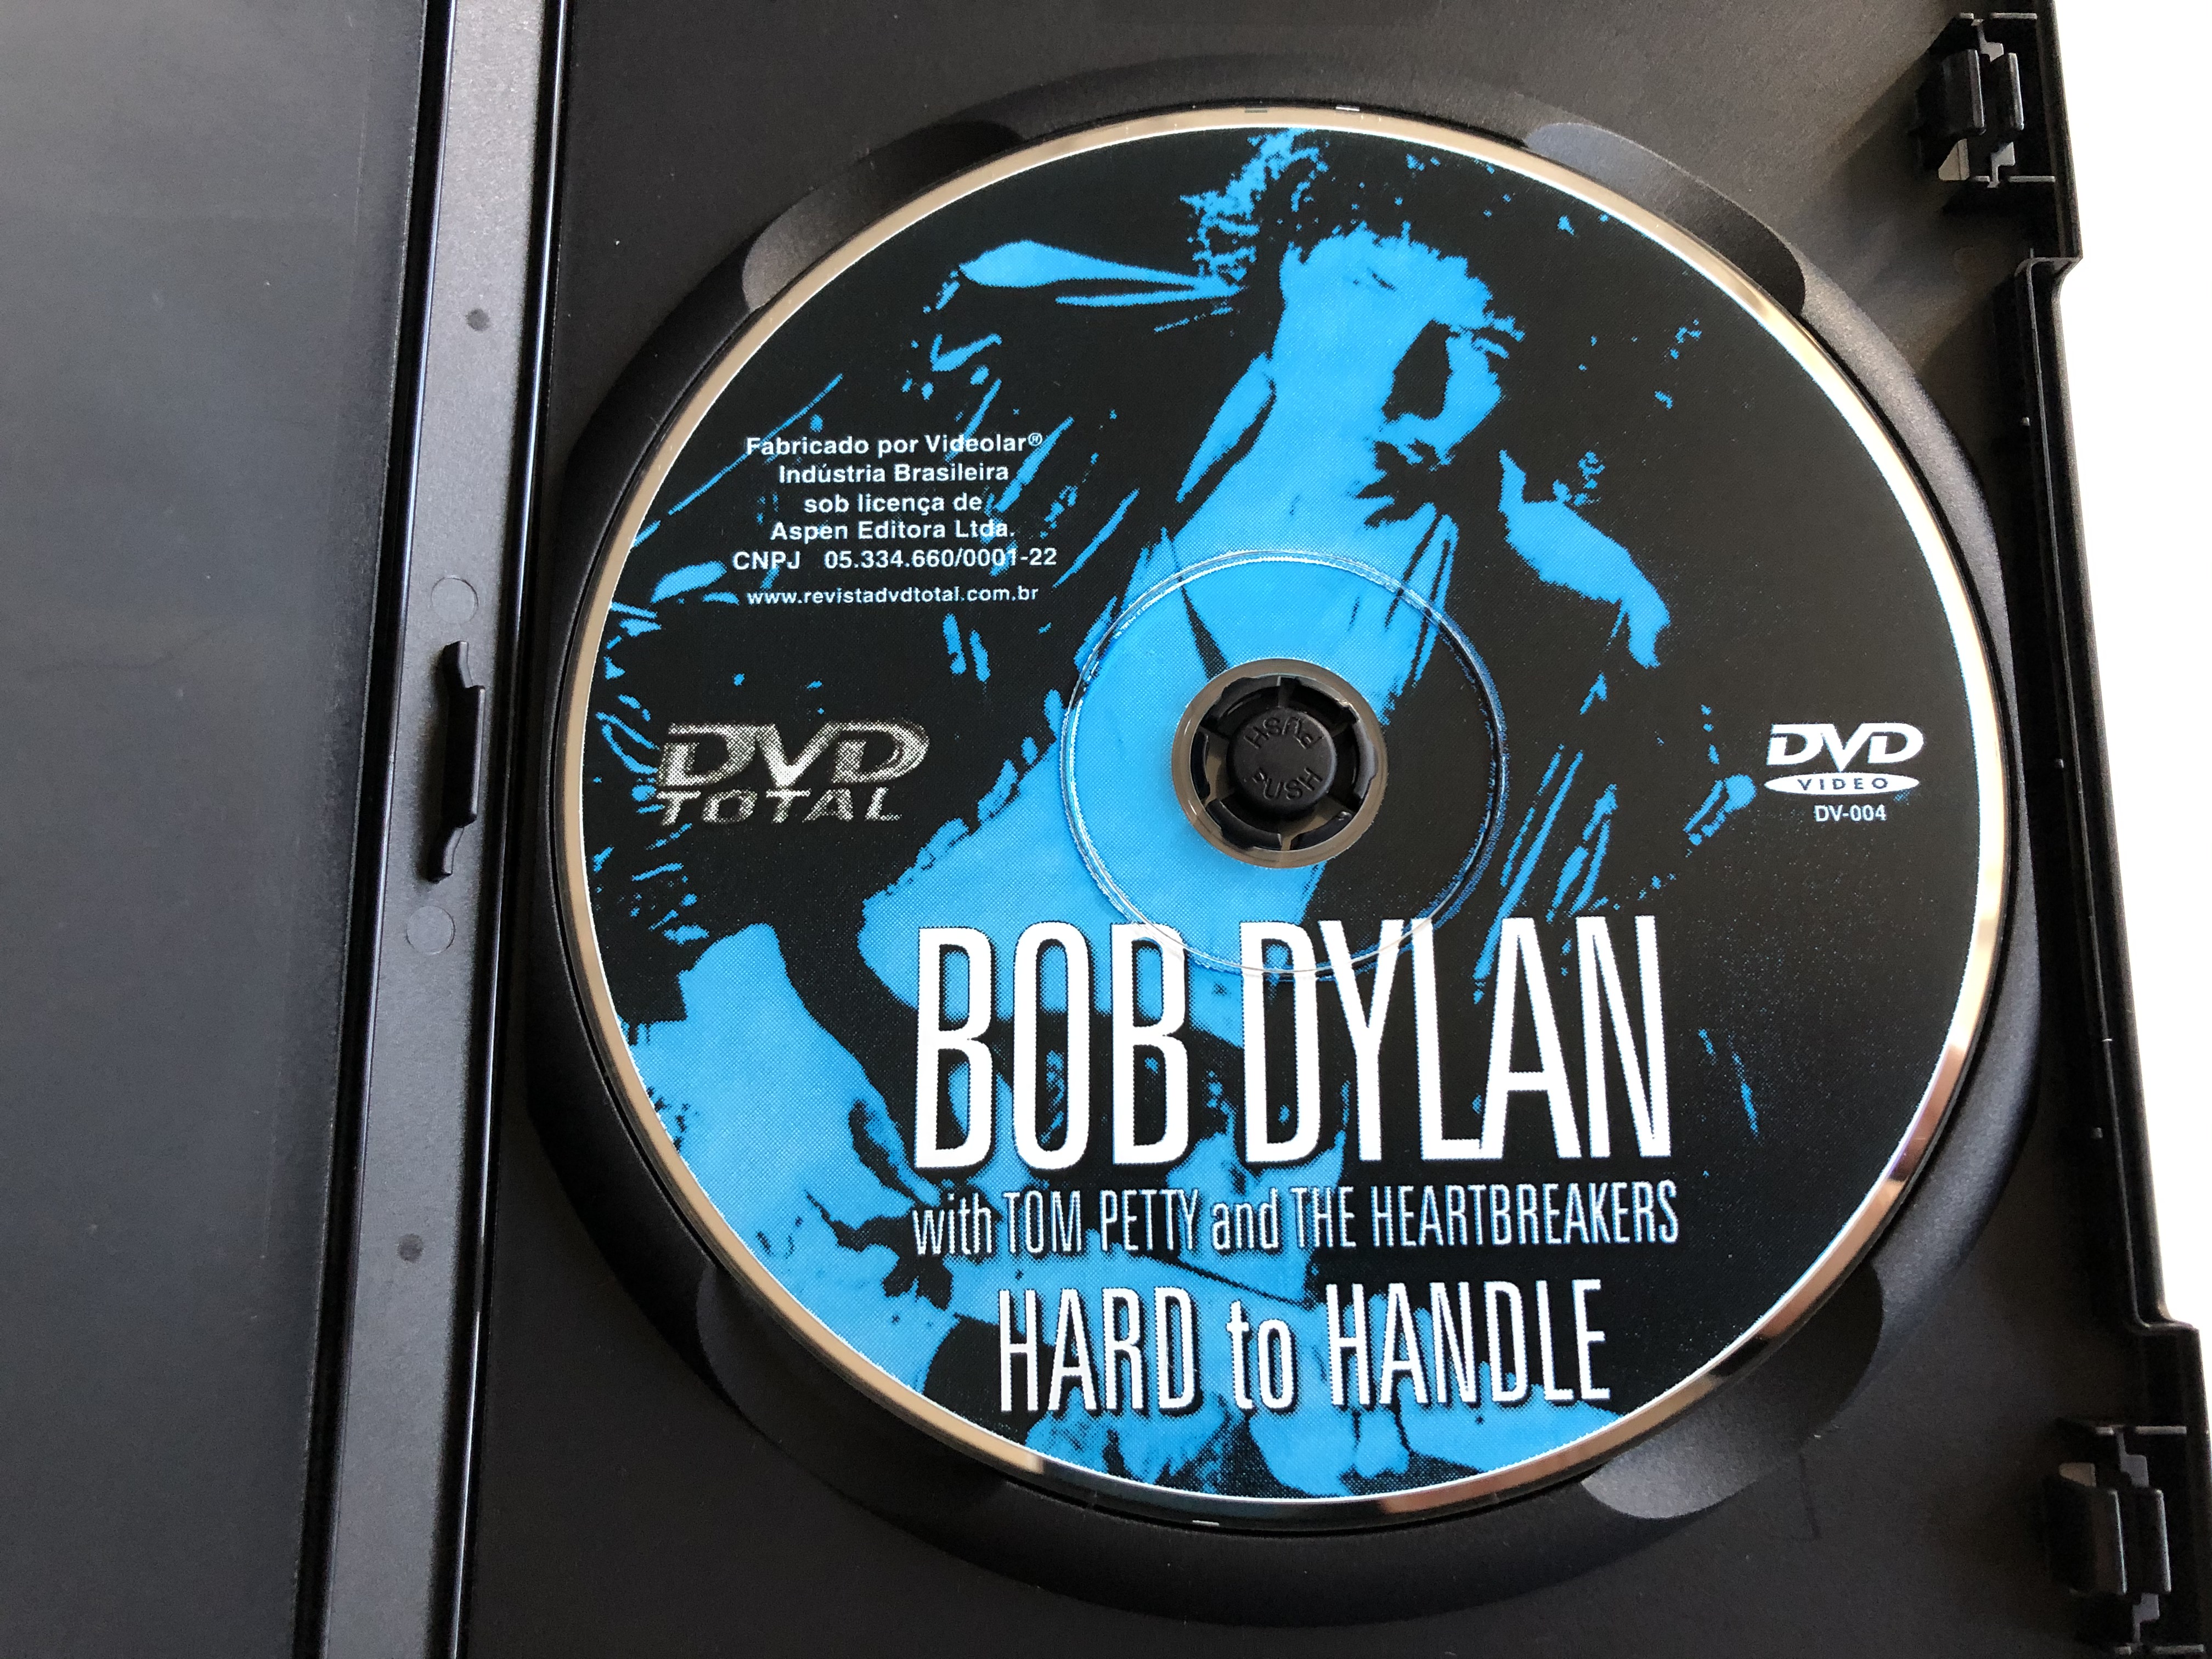 hard-to-handle-dvd-bob-dylan-with-tom-petty-and-the-heartbreakers-2.jpg